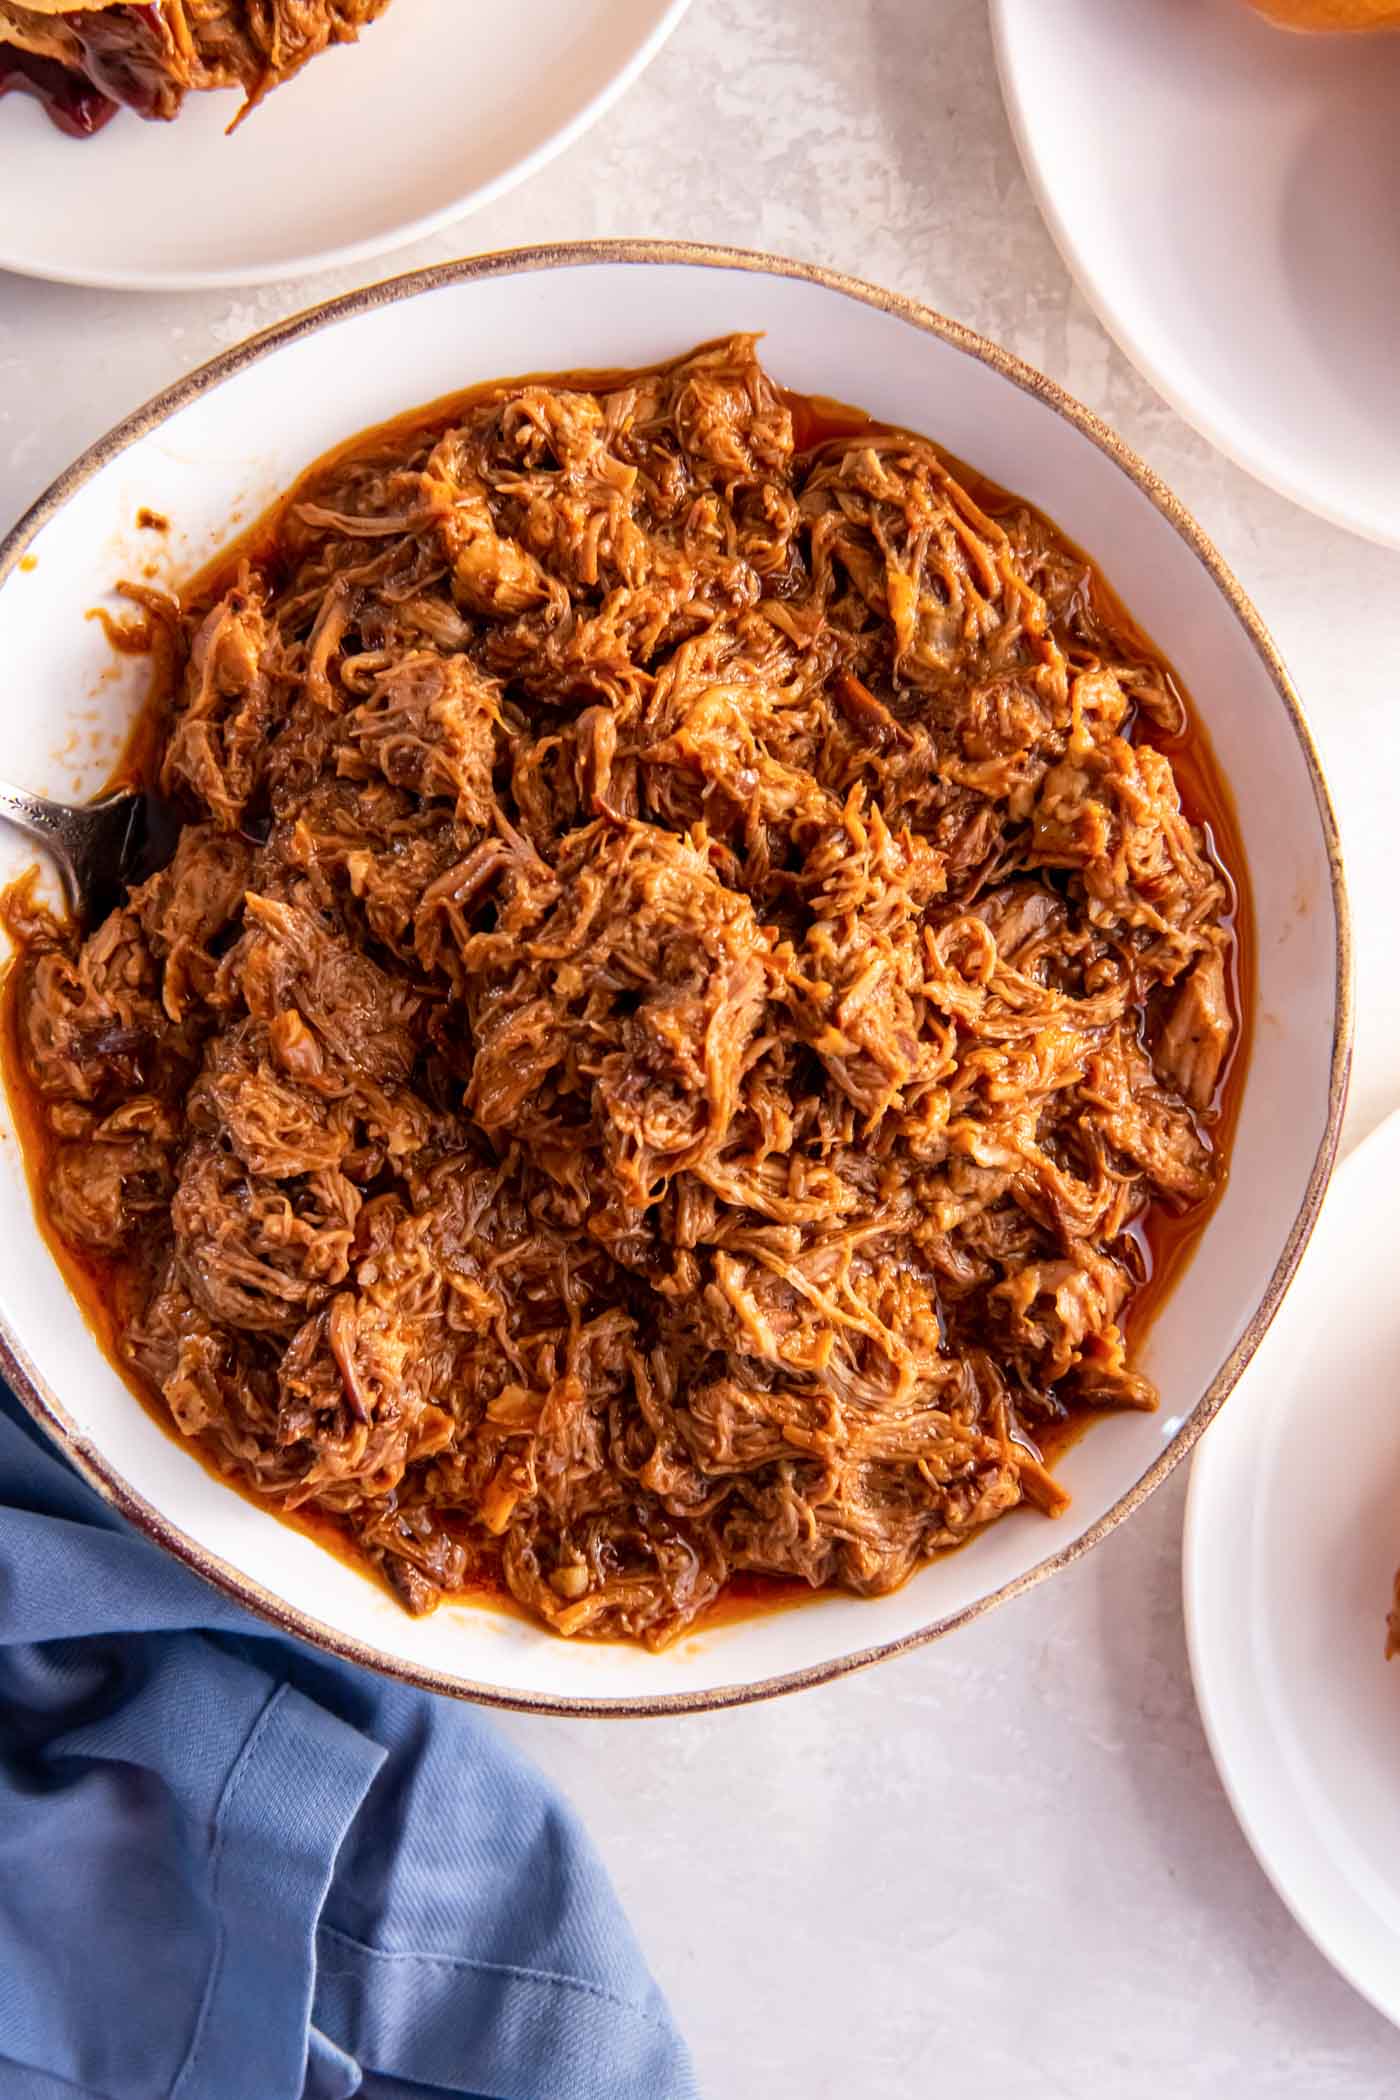 Pulled pork in a serving bowl.